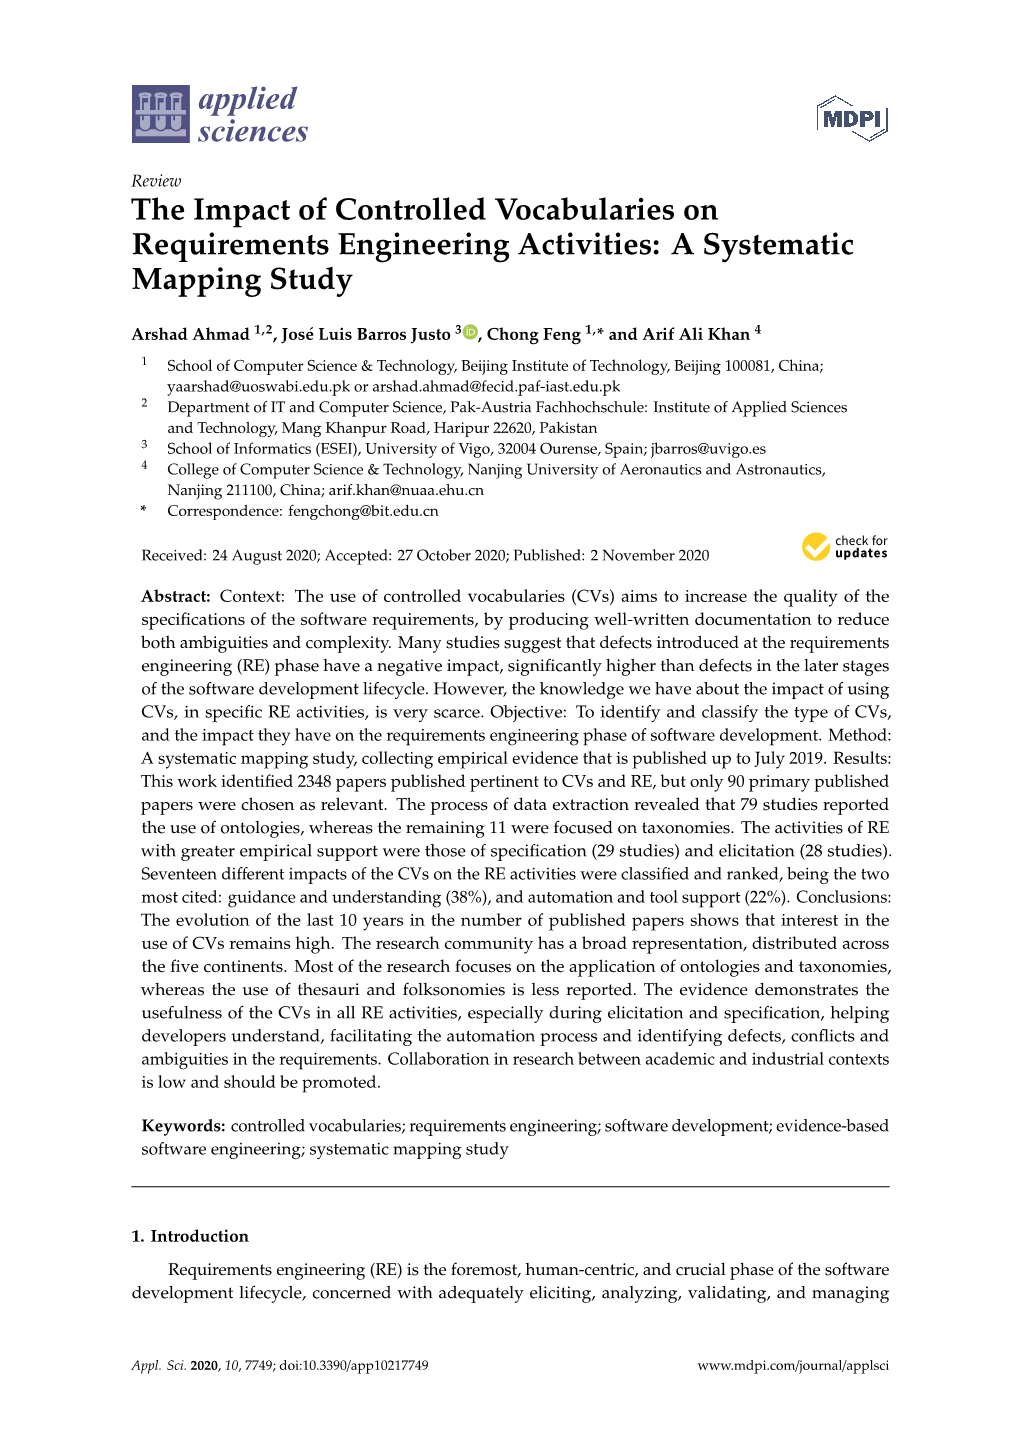 The Impact of Controlled Vocabularies on Requirements Engineering Activities: a Systematic Mapping Study